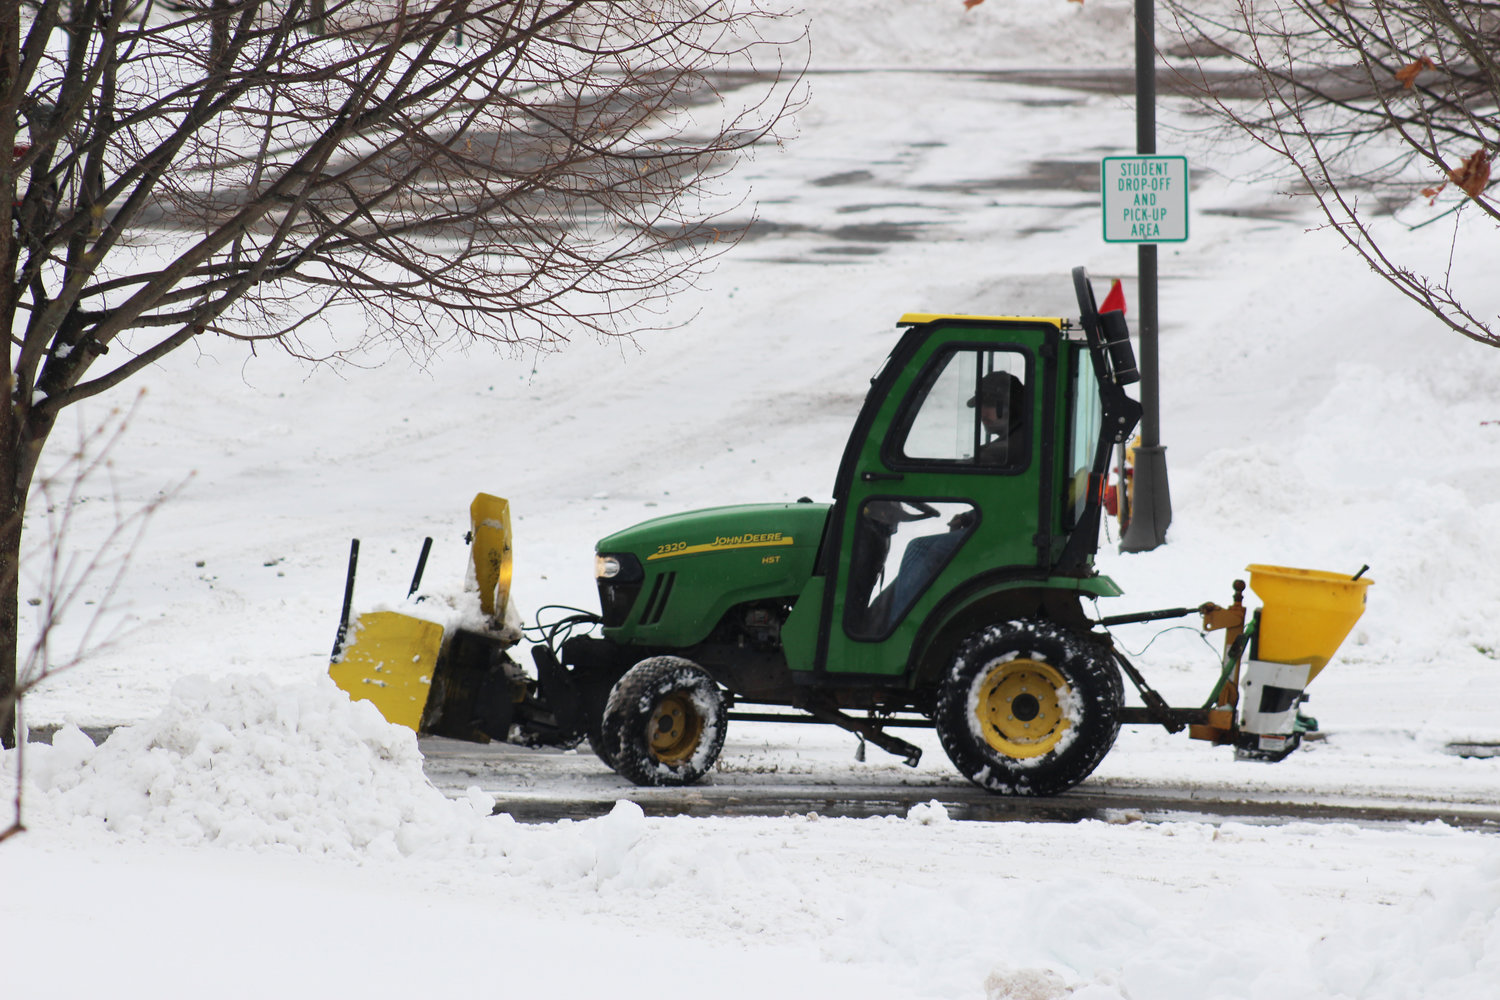 Crews were busy clearing snow from the Liberty Elementary School parking lots on Monday afternoon.